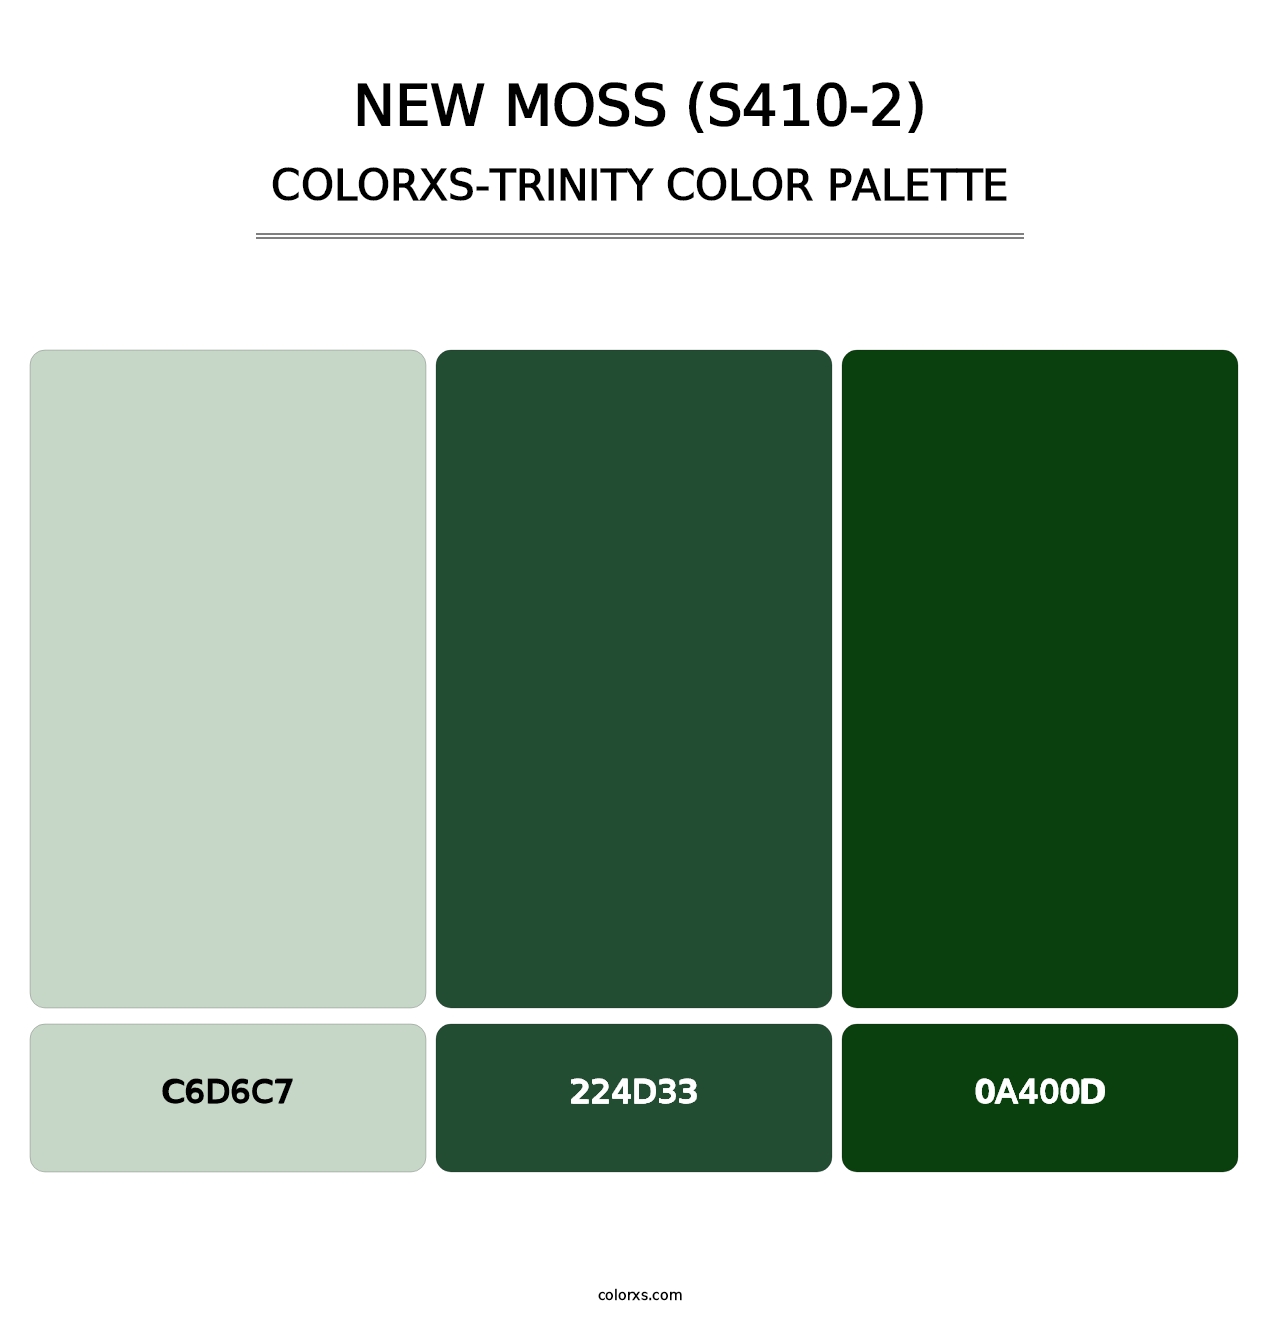 New Moss (S410-2) - Colorxs Trinity Palette